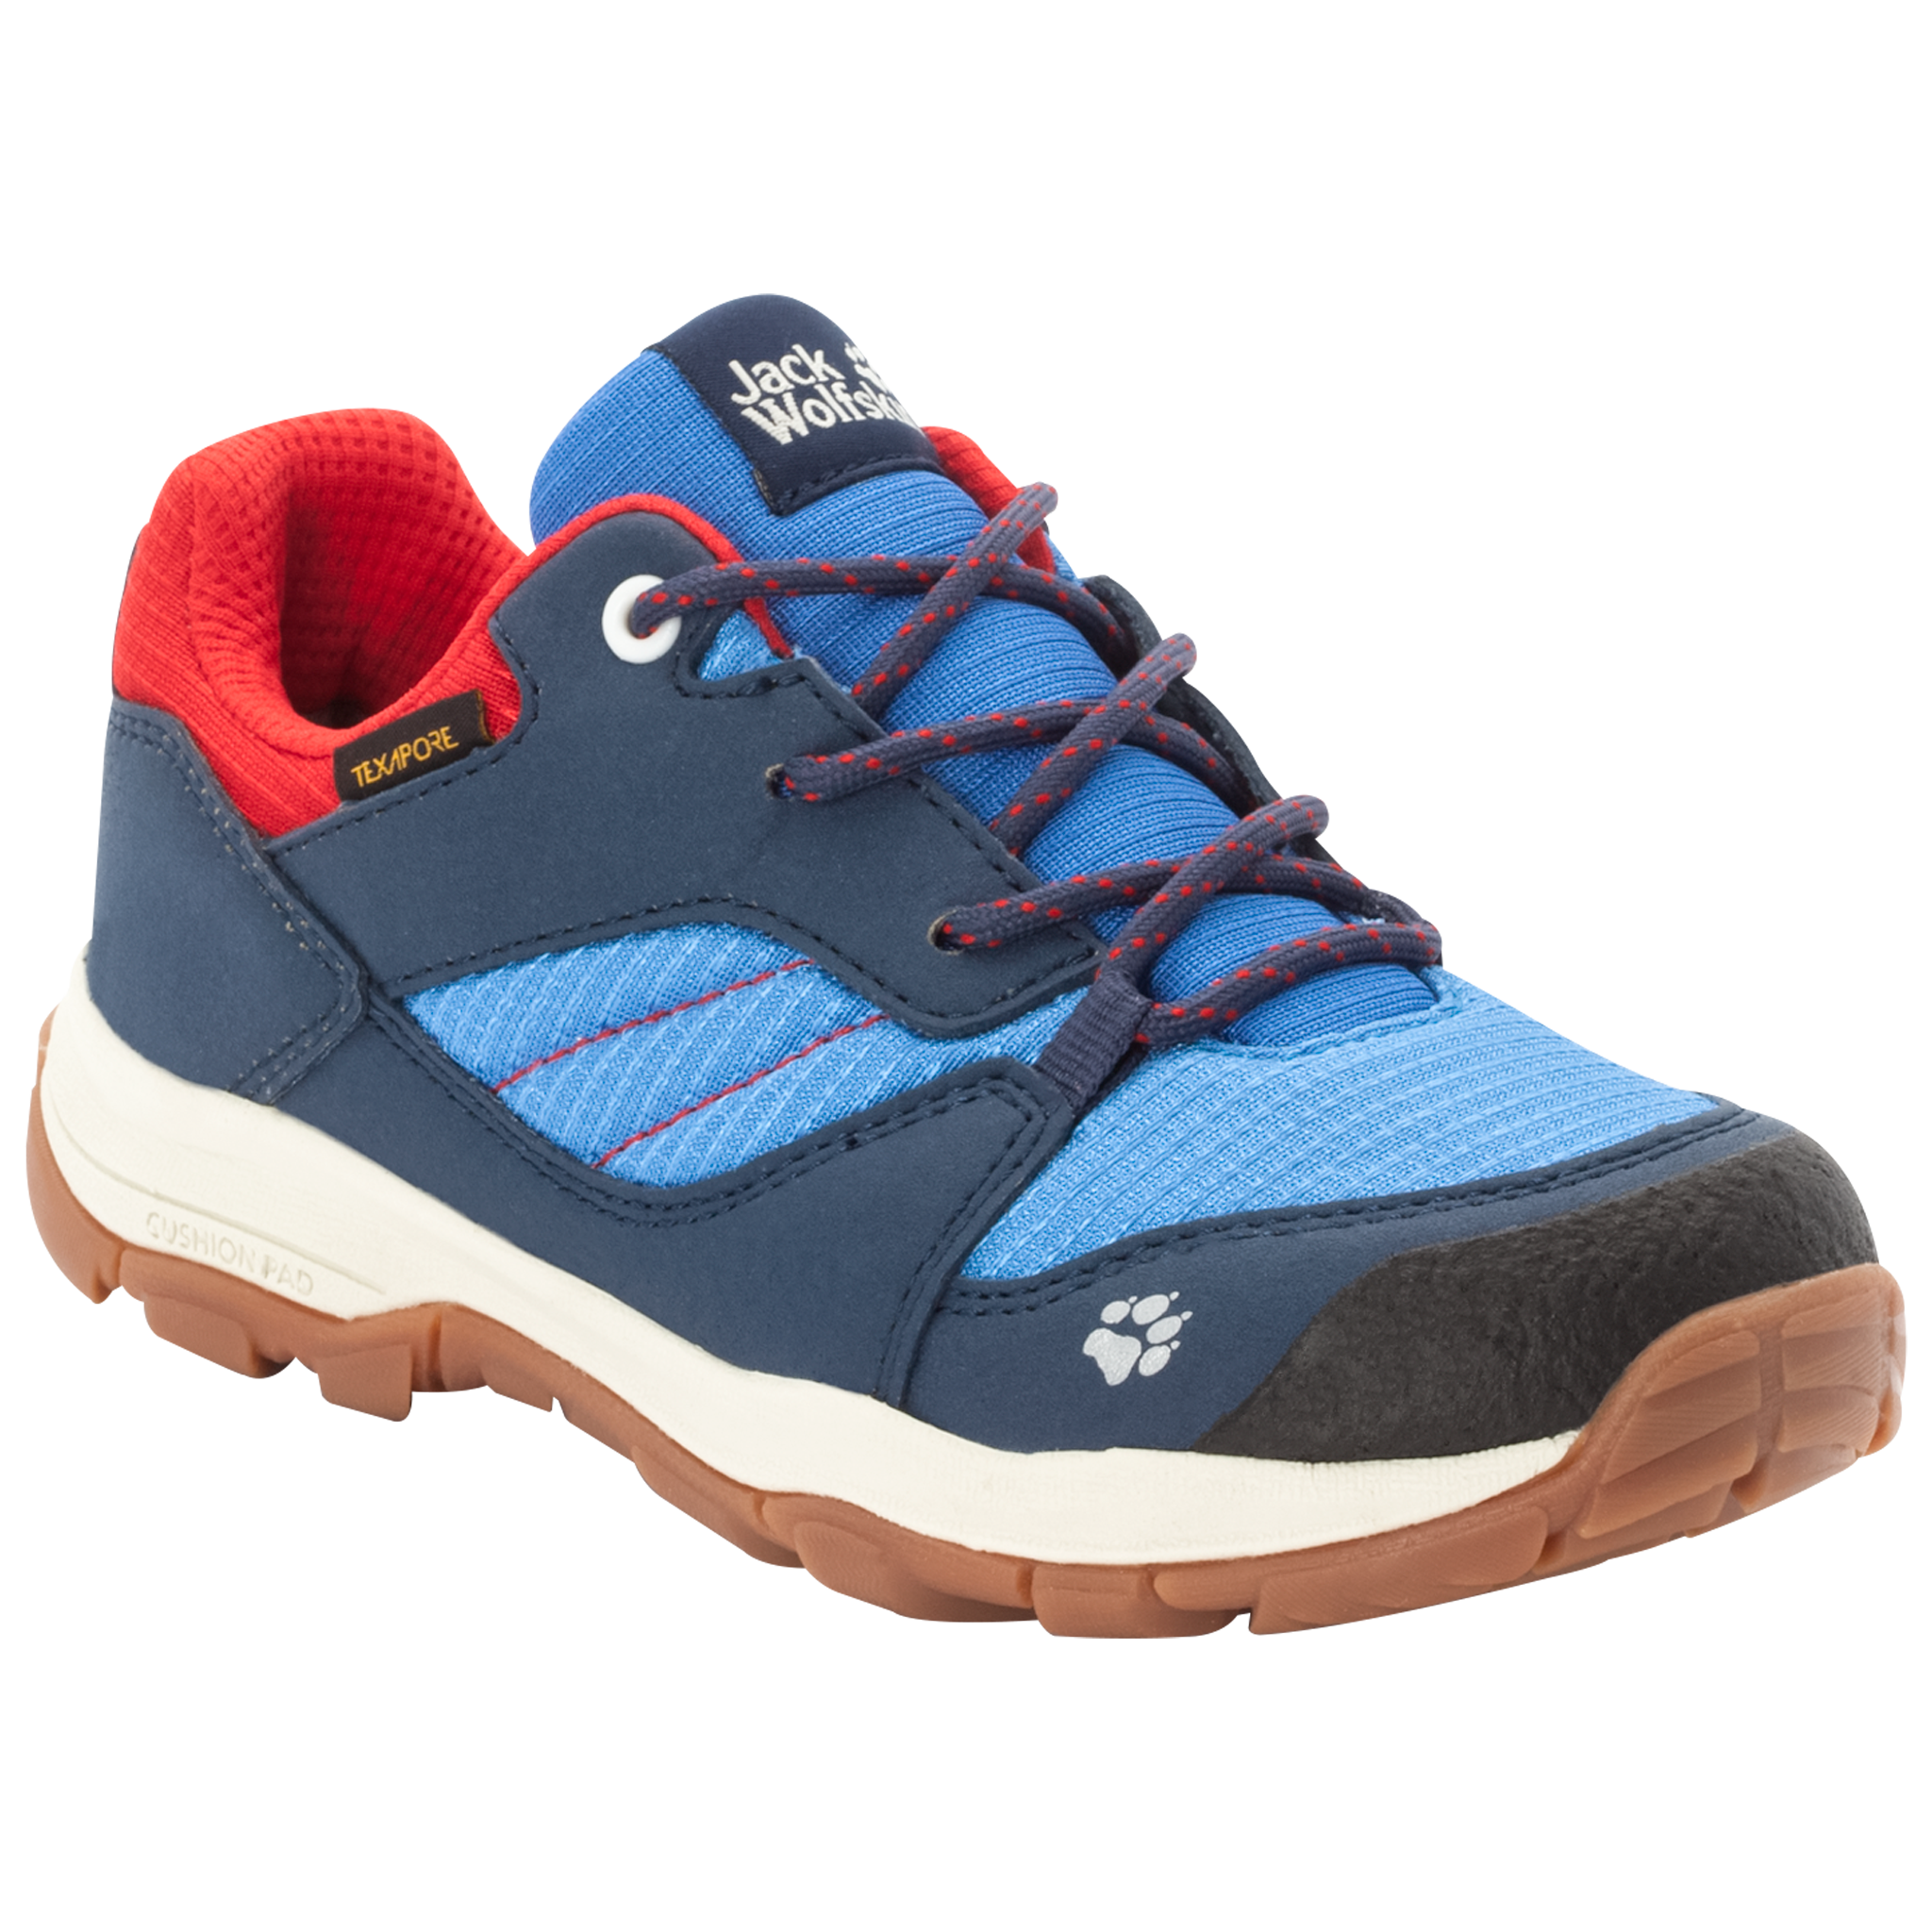 Blue / Red Boys' Hiking Shoes